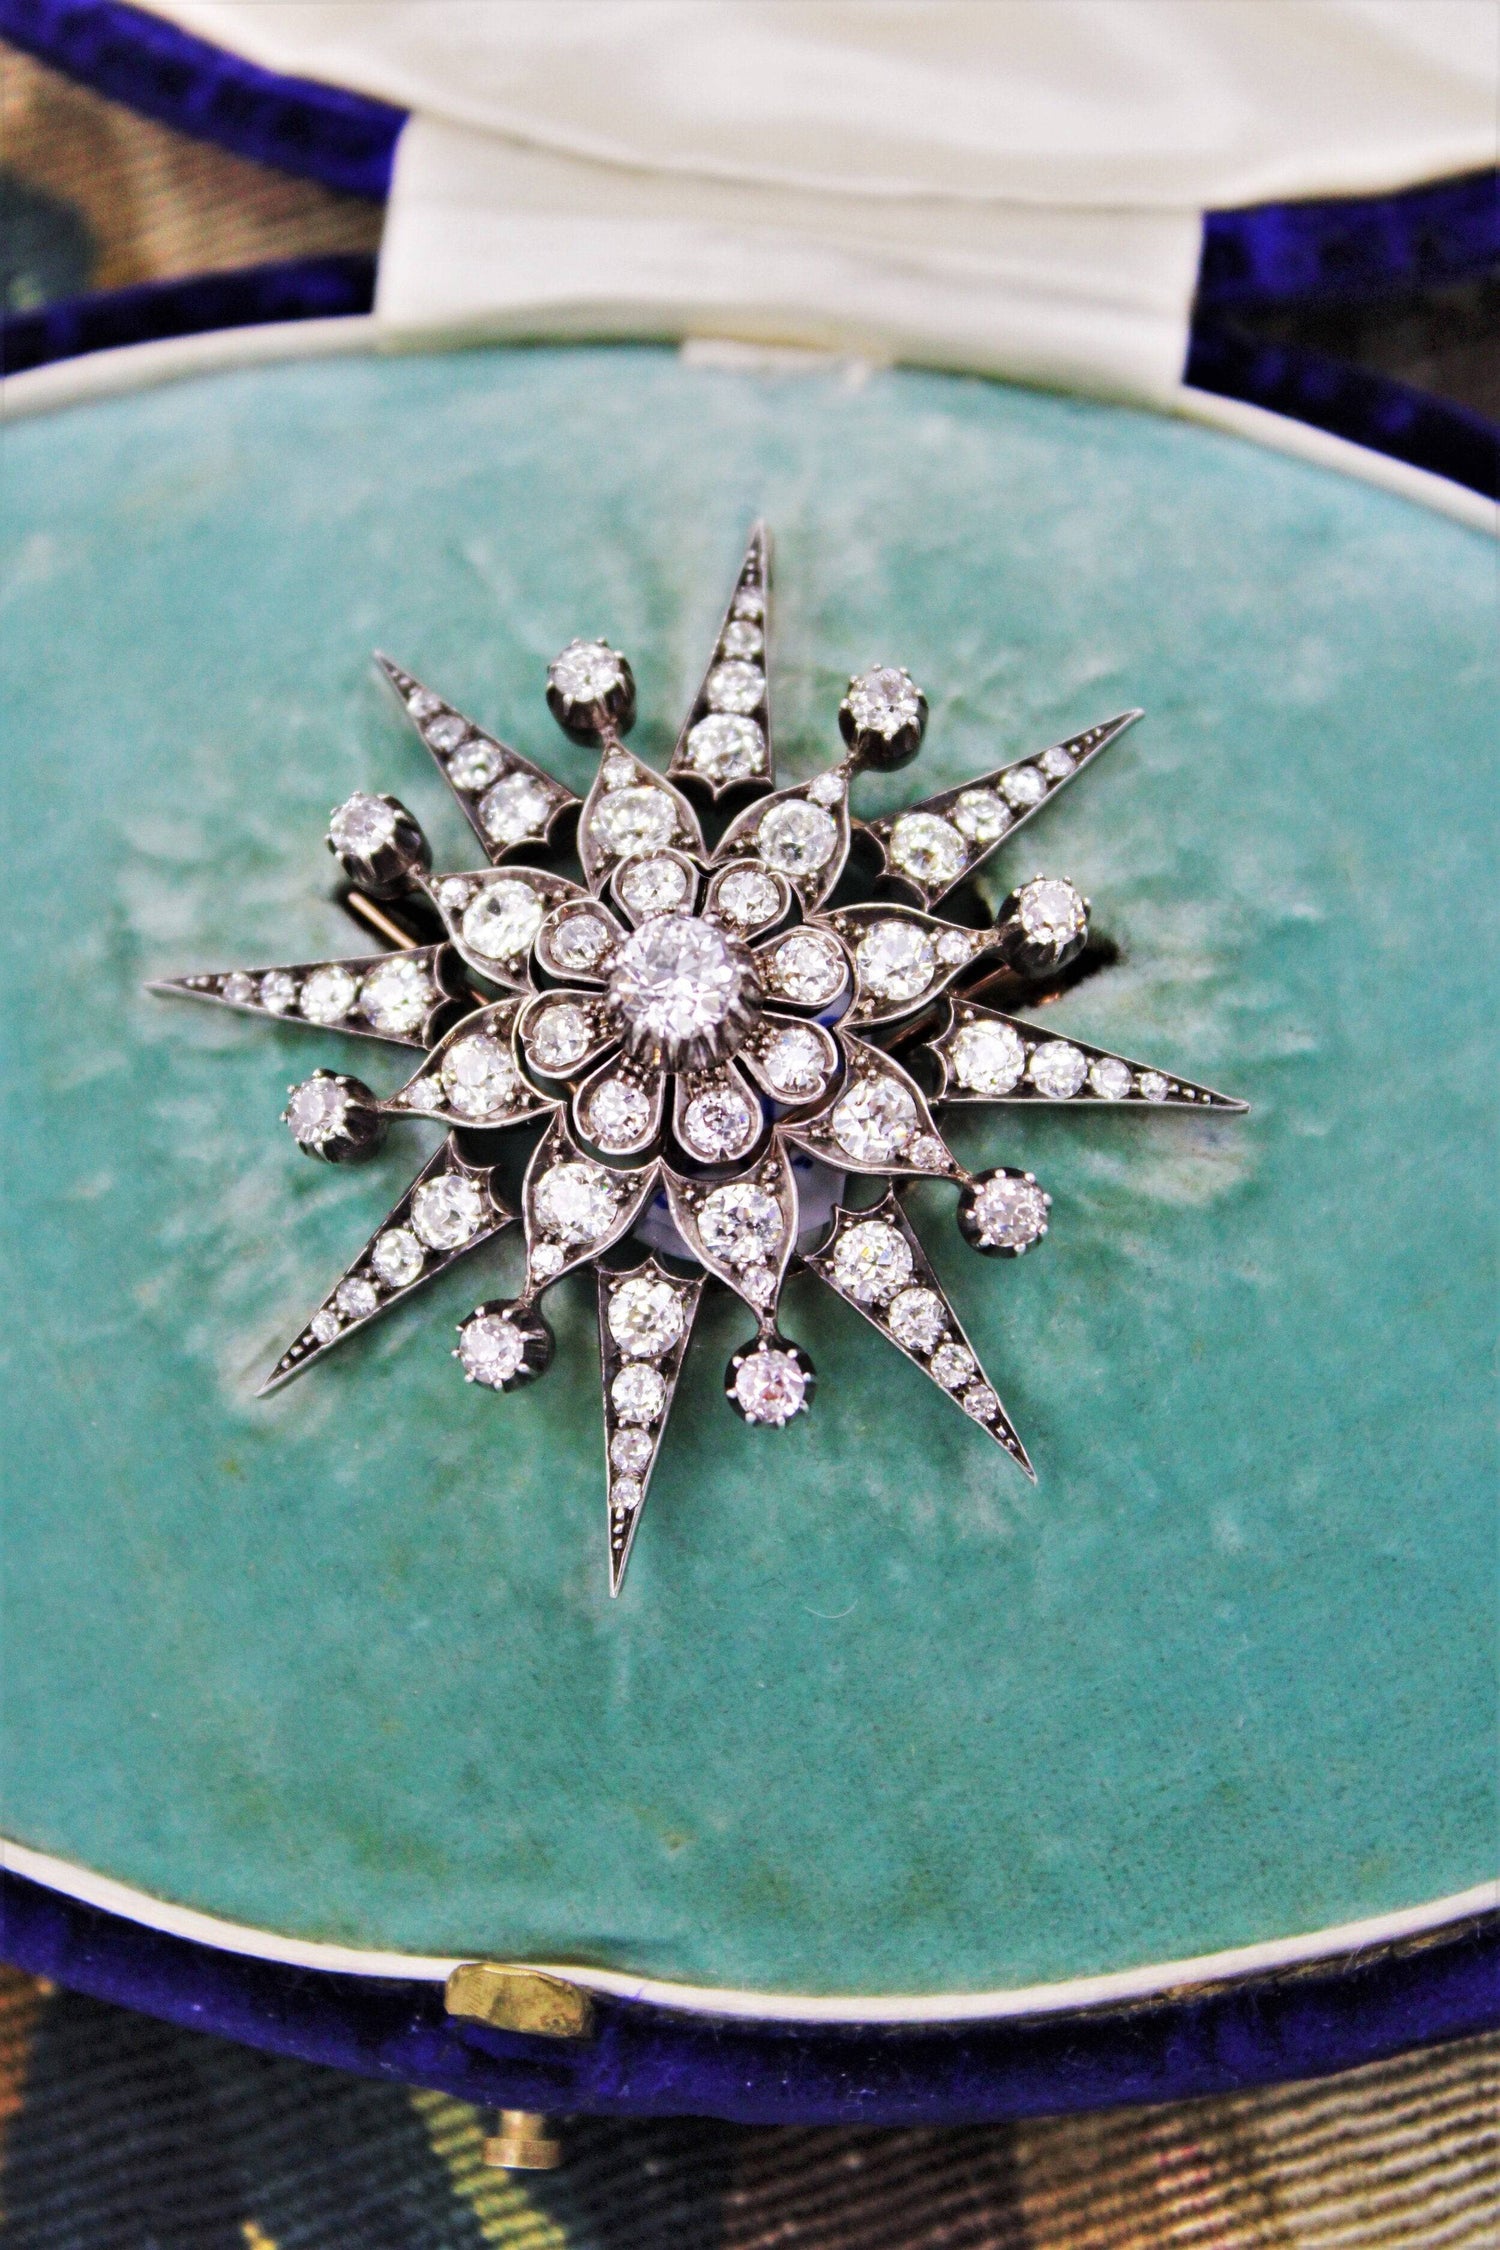 An exquisite Victorian Diamond Starburst Brooch / Pendant / Hair Ornament mounted in 10 Carat Rose Gold & Silver - Tipped, English, Circa 1880 - Robin Haydock Antiques